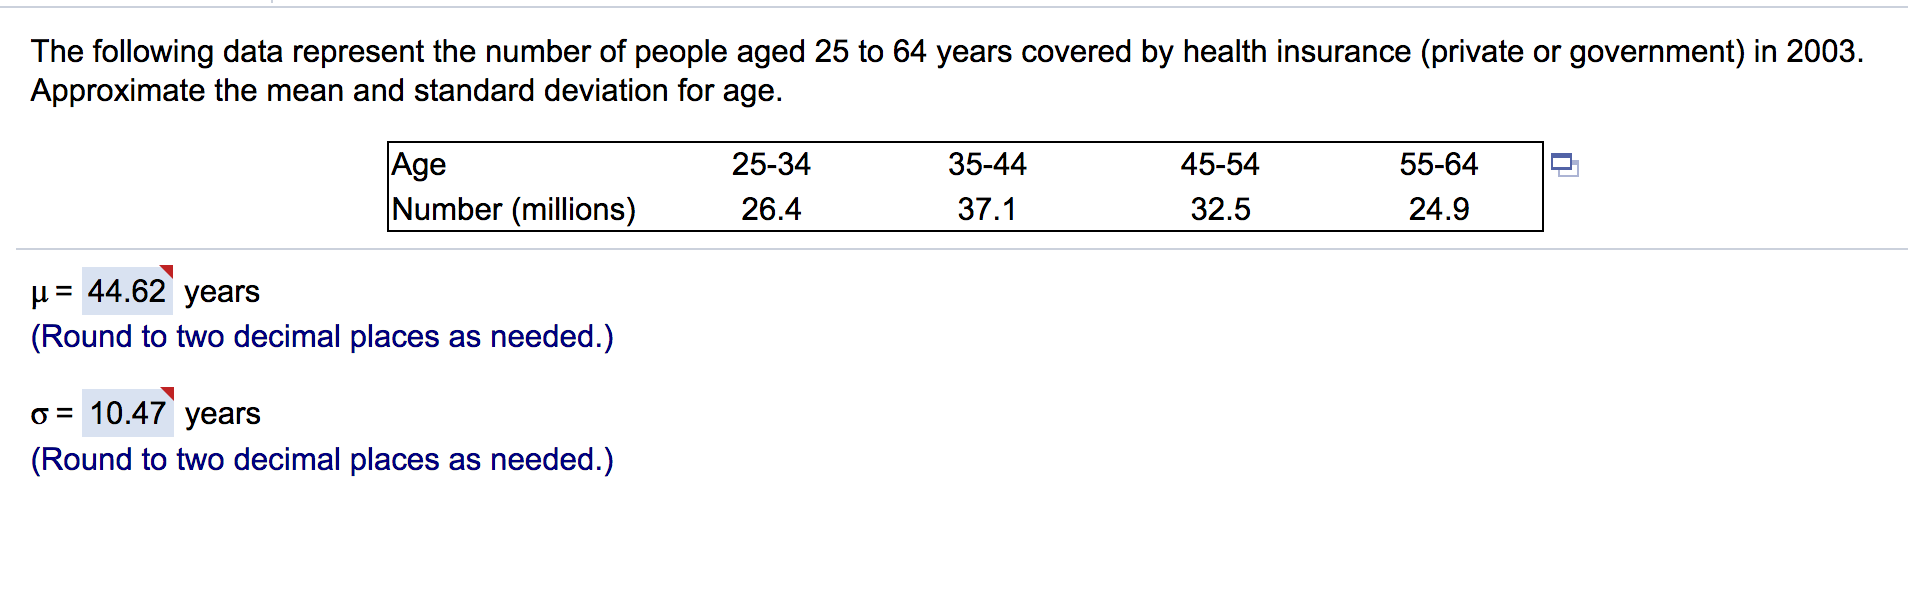 The following data represent the number of people aged 25 to 64 years covered by health insurance (private or government) in 2003
Approximate the mean and standard deviation for age.
Age
Number (millions)
25-34
35-44
45-54
55-64
24.9
26.4
37.1
32.5
= r1
44.62 years
(Round to two decimal places as needed.)
=10.47 years
(Round to two decimal places as needed.)
